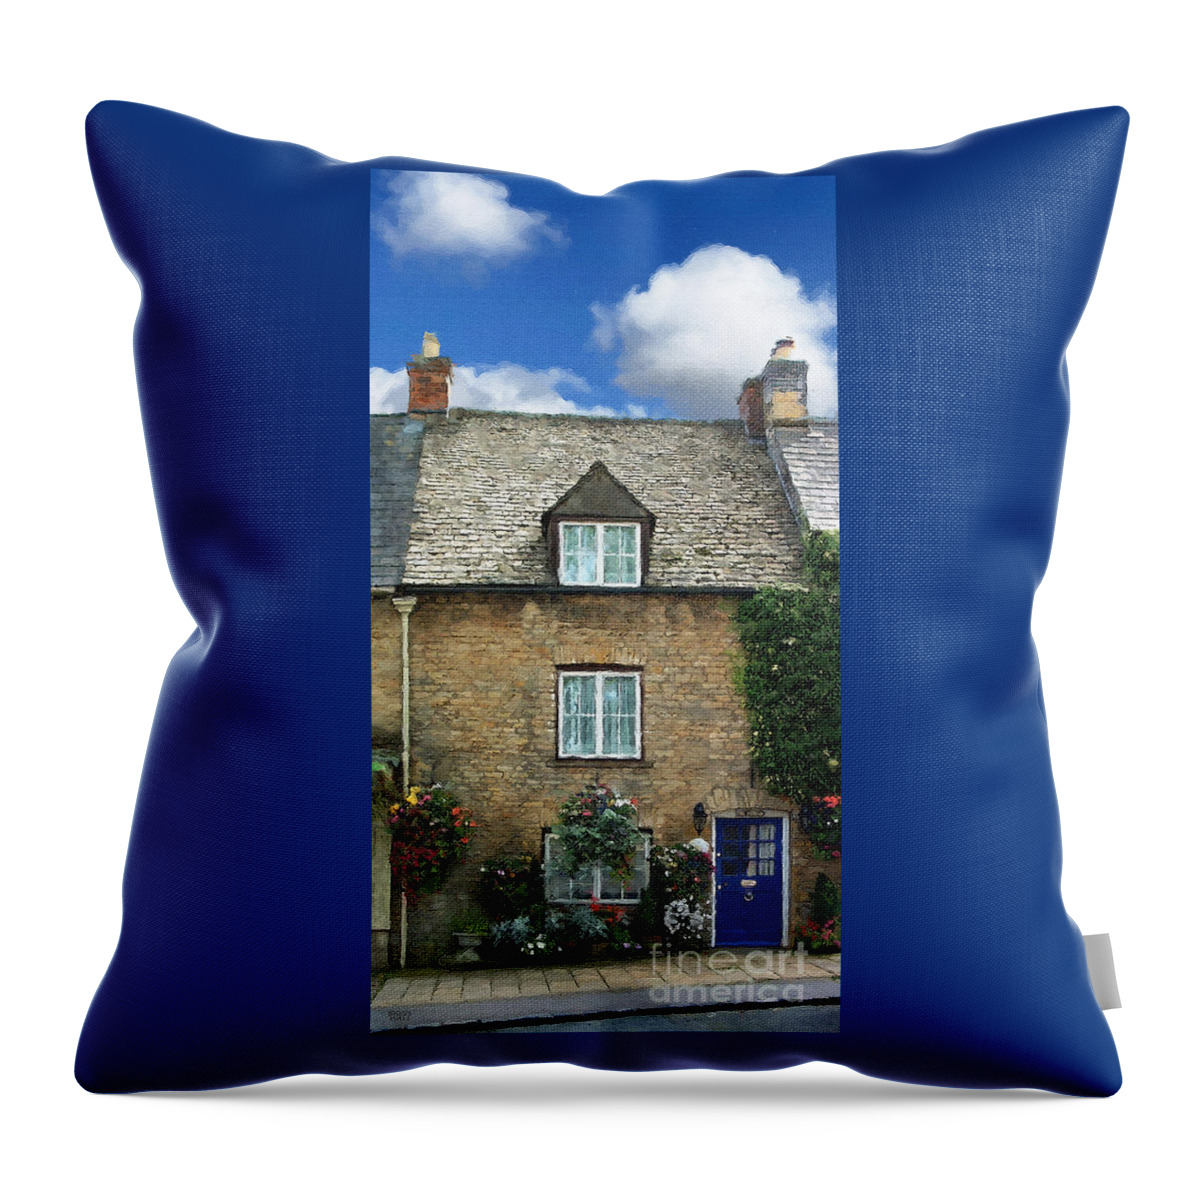 Stow-in-the-wold Throw Pillow featuring the photograph The Pound Too by Brian Watt